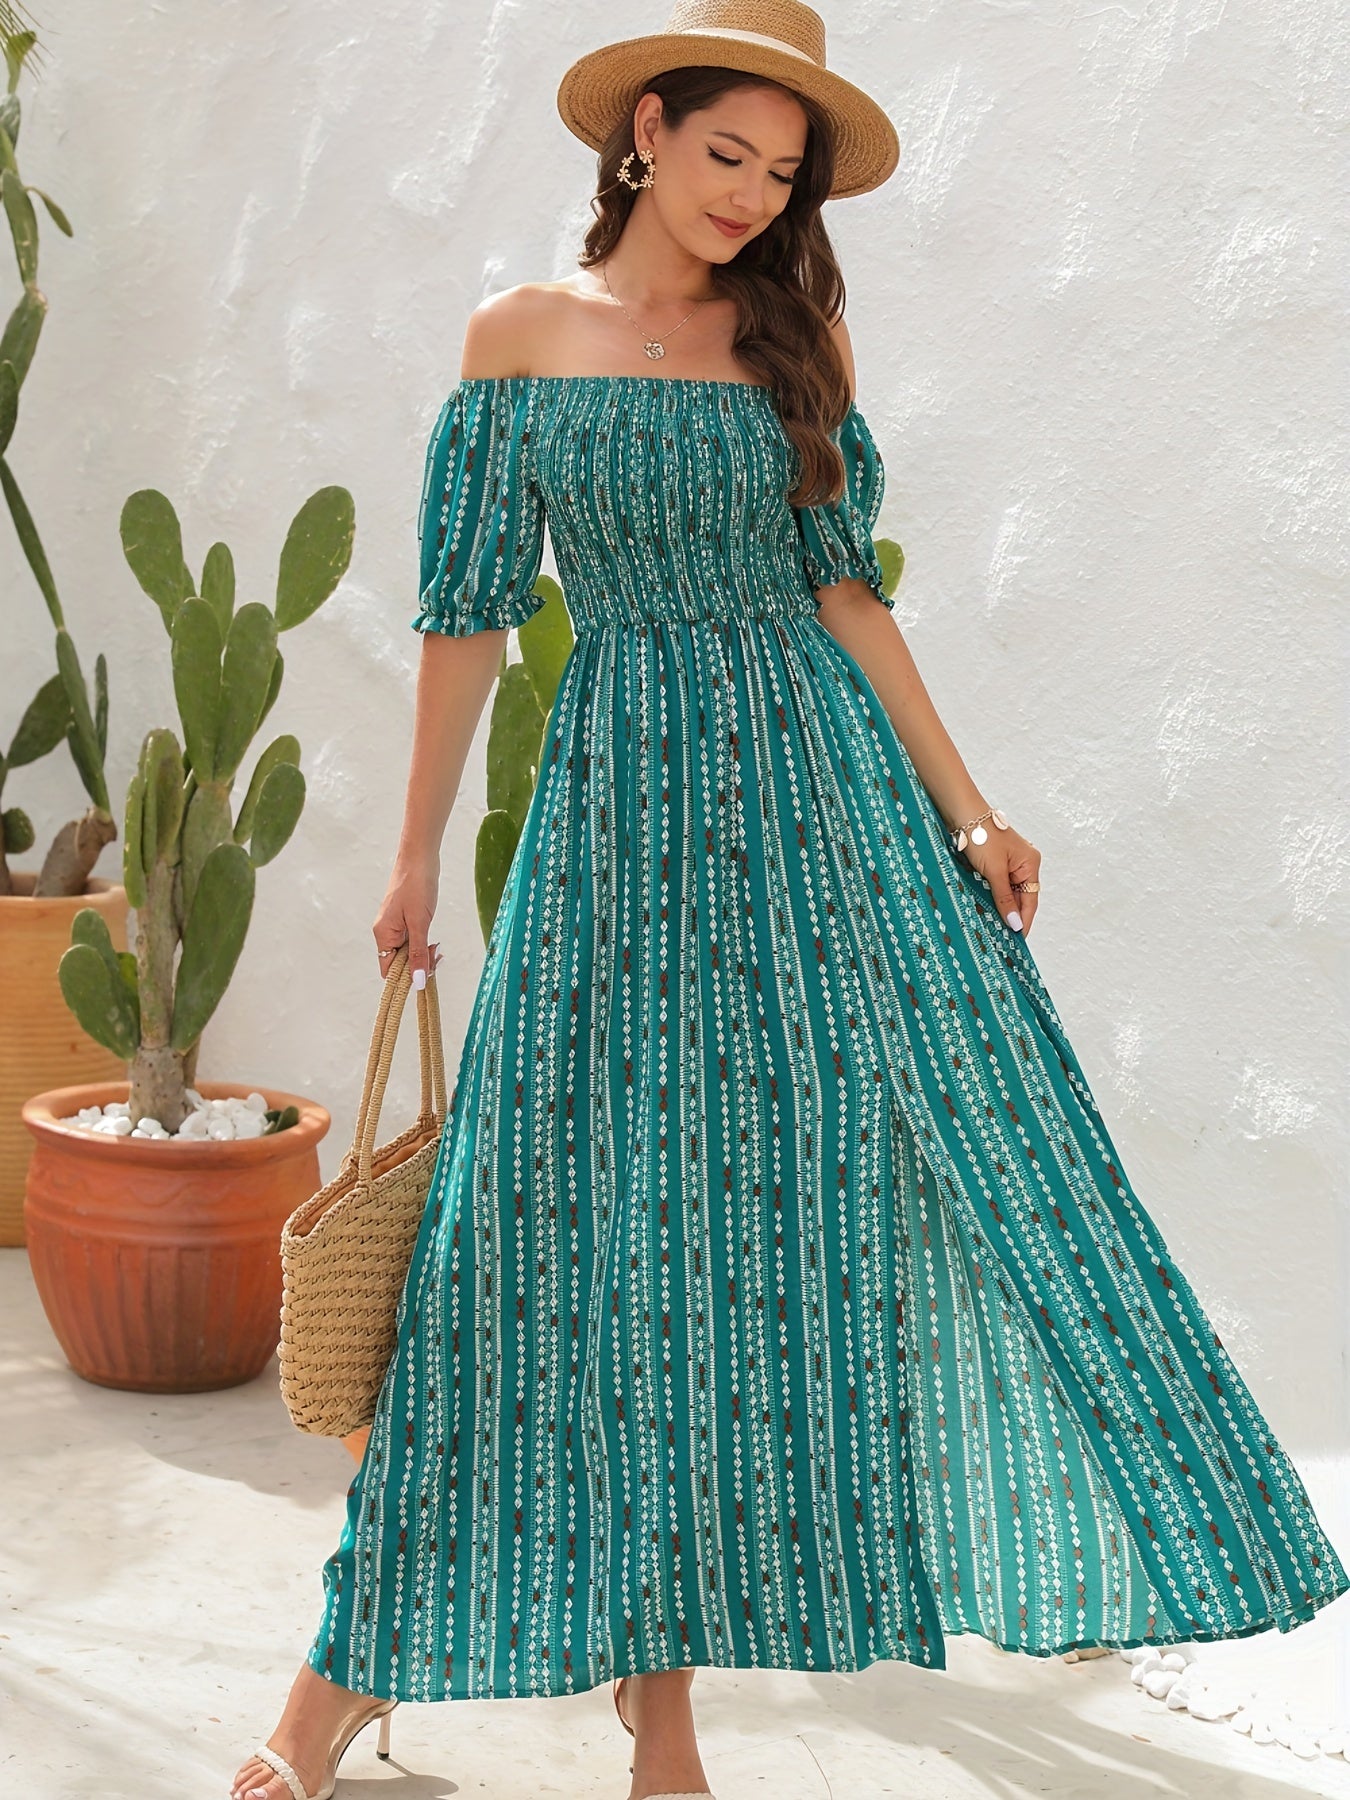 Bohemian Geometric Print Off Shoulder Side Slit Dress, Vacation  Dress, Cocktail Party Dress For Spring & Summer, Women's Clothing